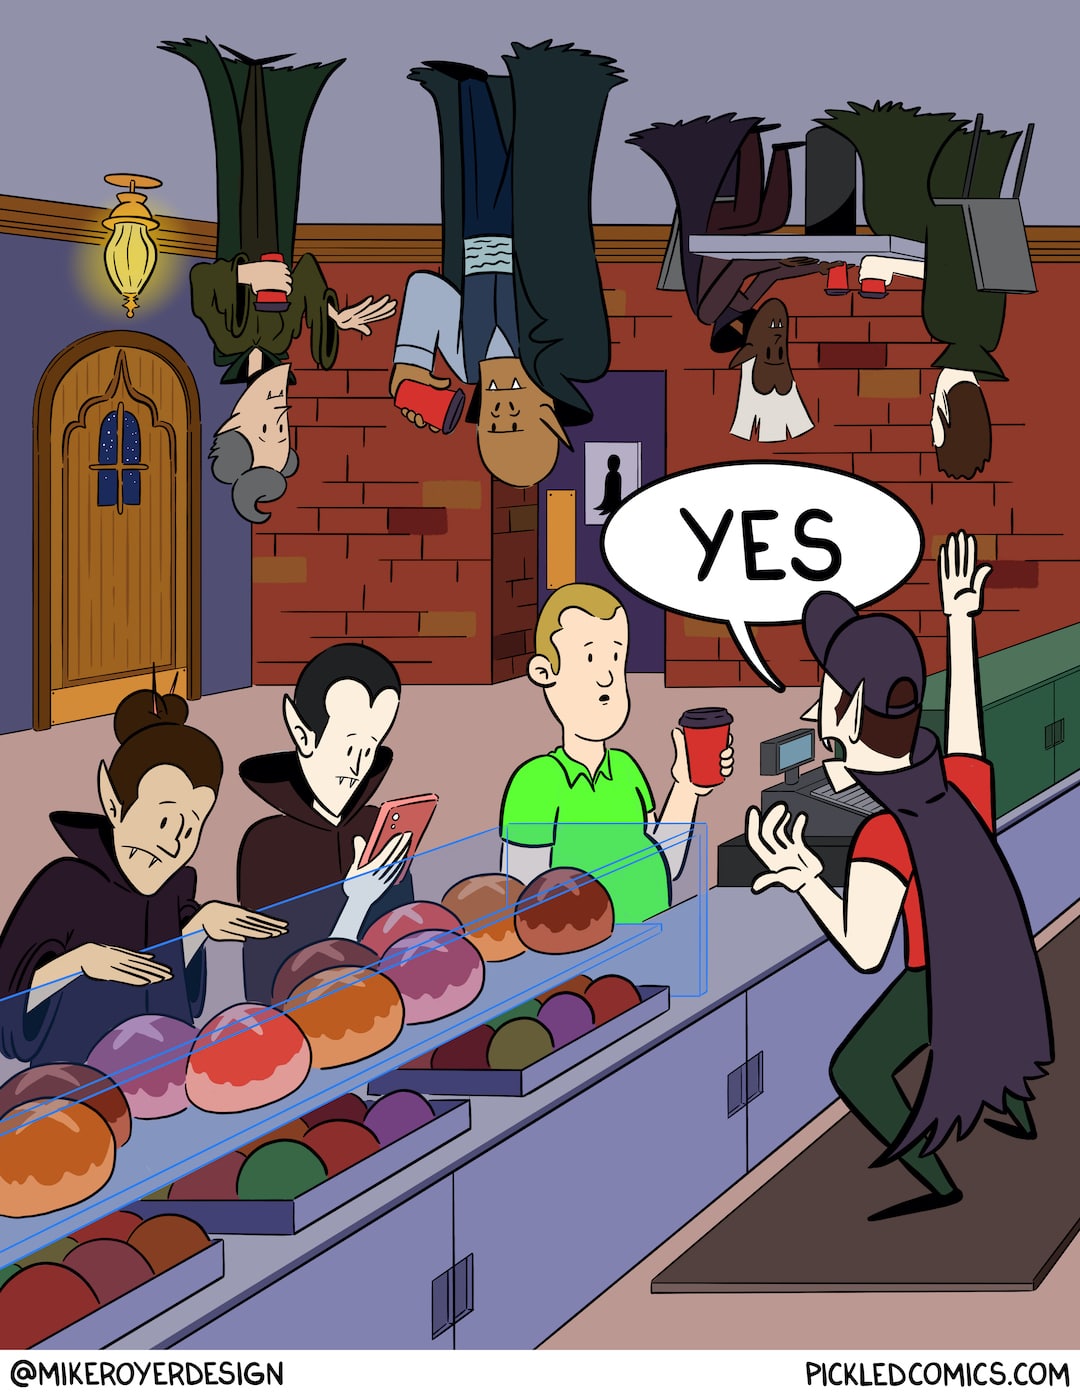 The final panel reveals the man is obviously inside a vampire coffee shop. Classic looking vampires with cloaks and fangs are in line behind him and more vampires are drinking from blood cups while hanging from the ceiling.